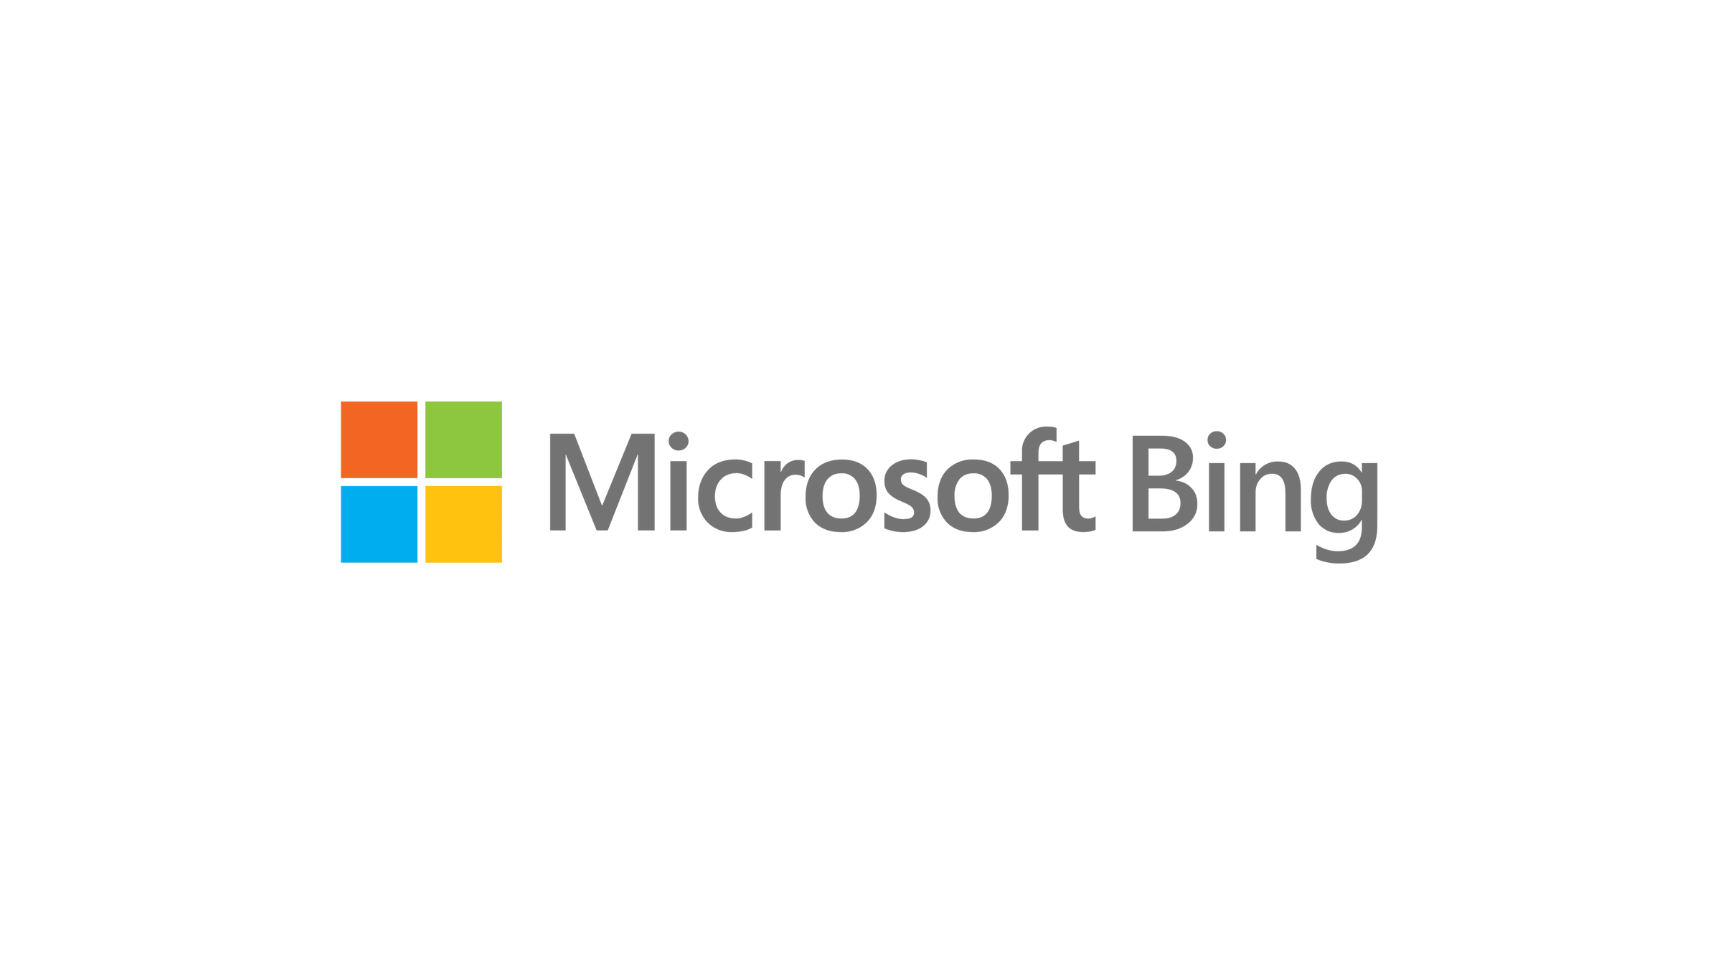 Why Is Microsoft's New Bing ChatBot Raising Ethical Eyebrows?